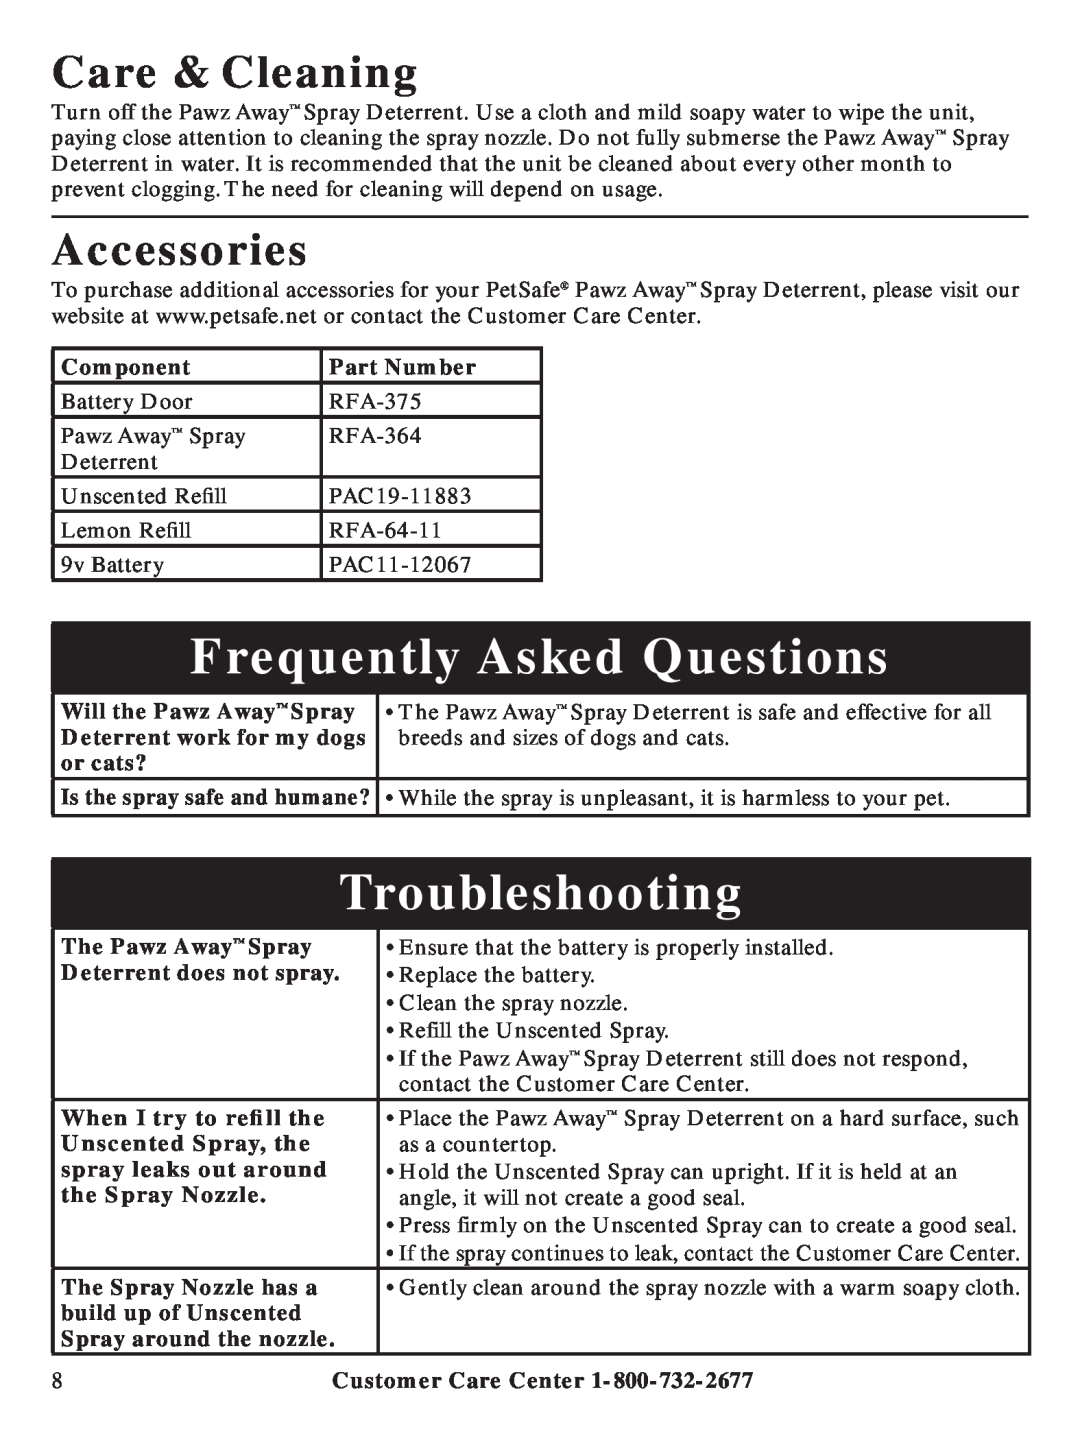 Petsafe PDT00-11312 manual Frequently Asked Questions, Troubleshooting, Care & Cleaning, Accessories 